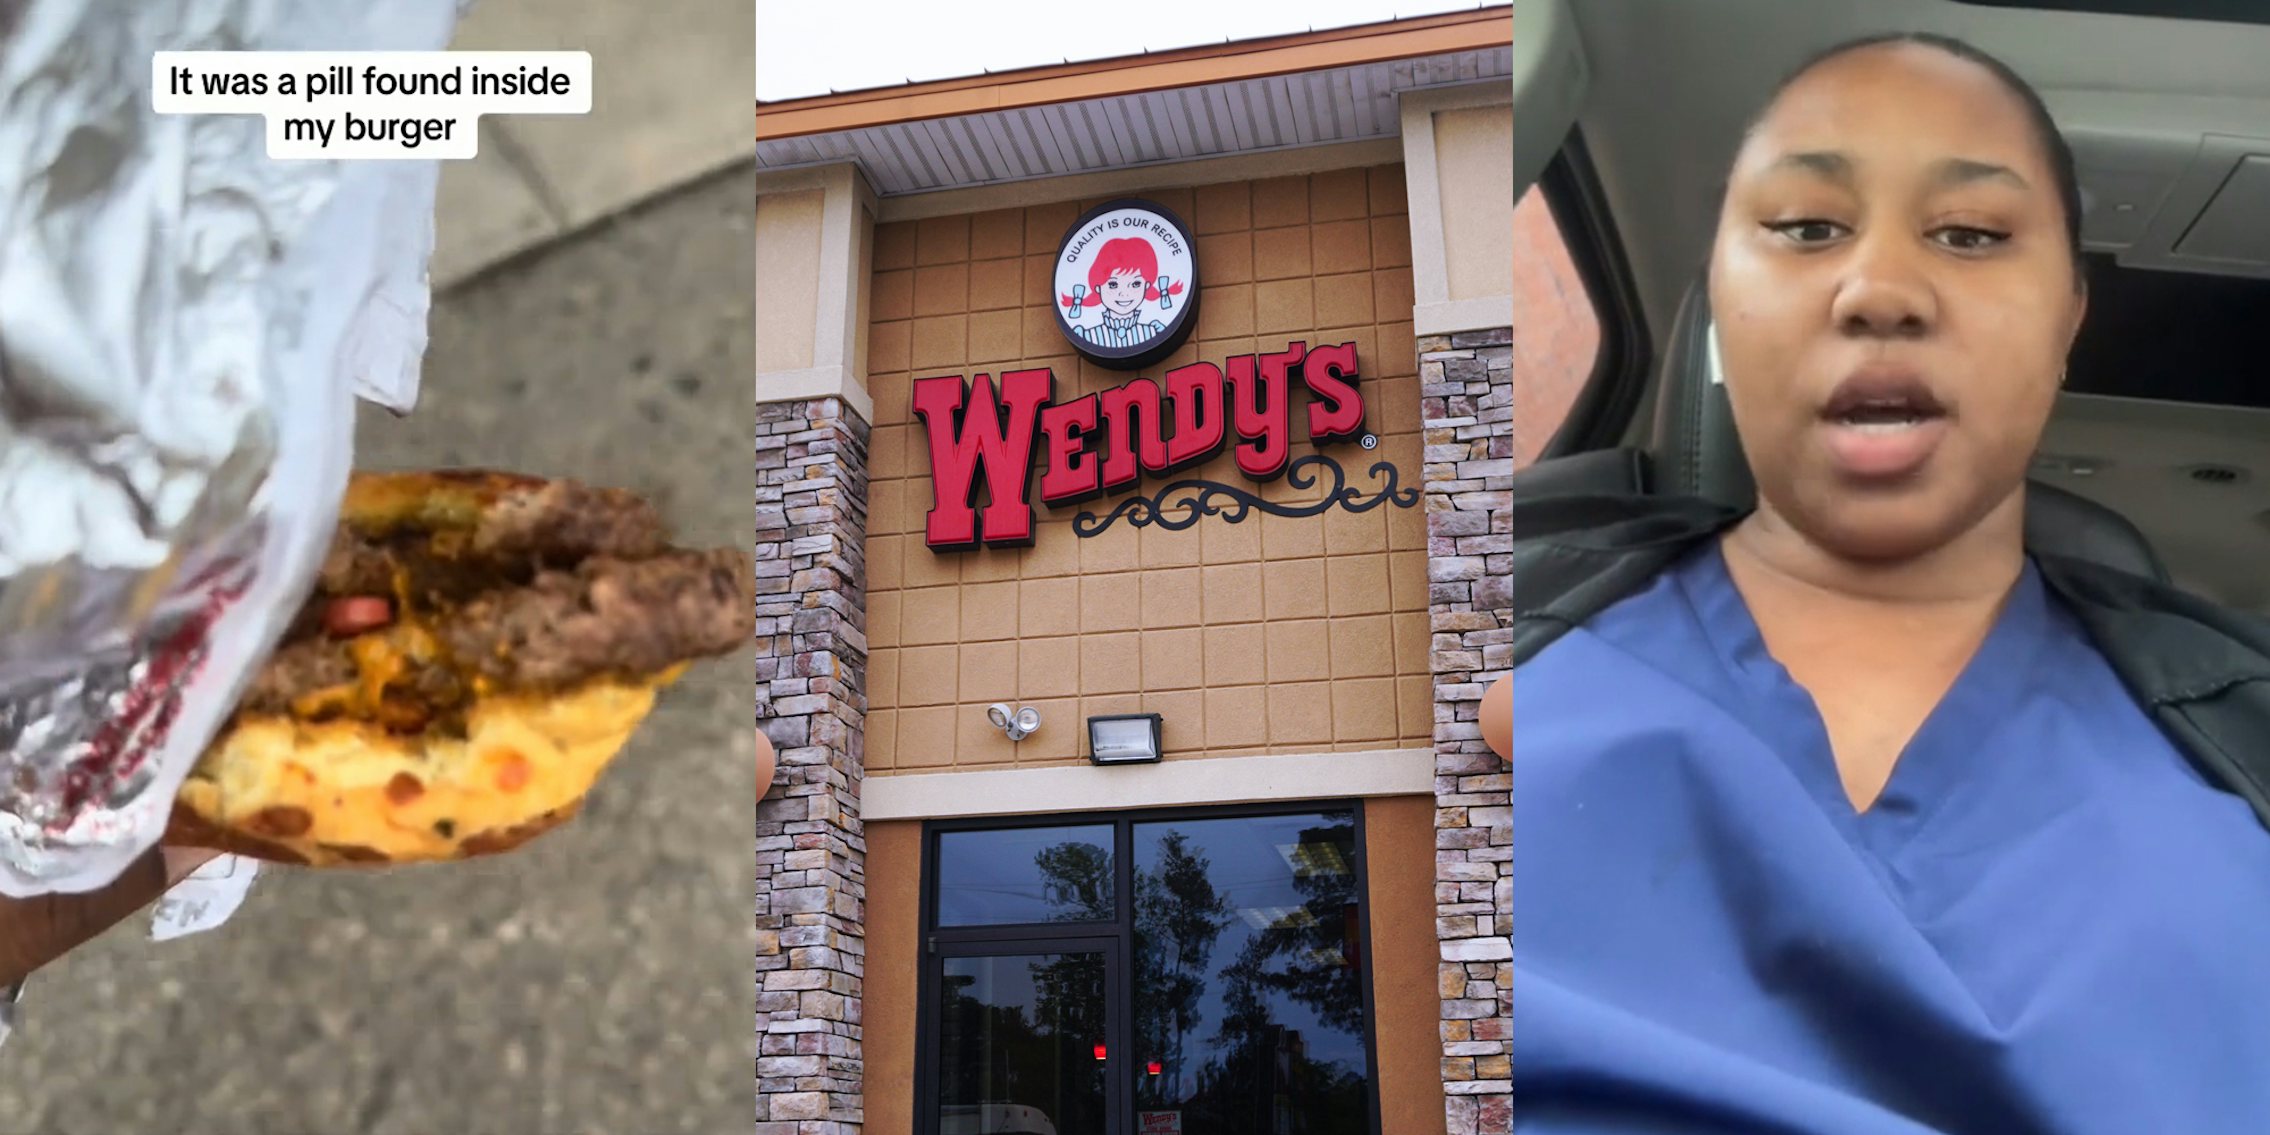 Wendy's customer holding burger with caption 'It was a pill found inside my burger' (l) Wendy's building with sign (c) Wendy's customer speaking in car with caption 'cuz she put the pill in the burger you really think her get-toe-self is gonna get a lawsuit?' (r)